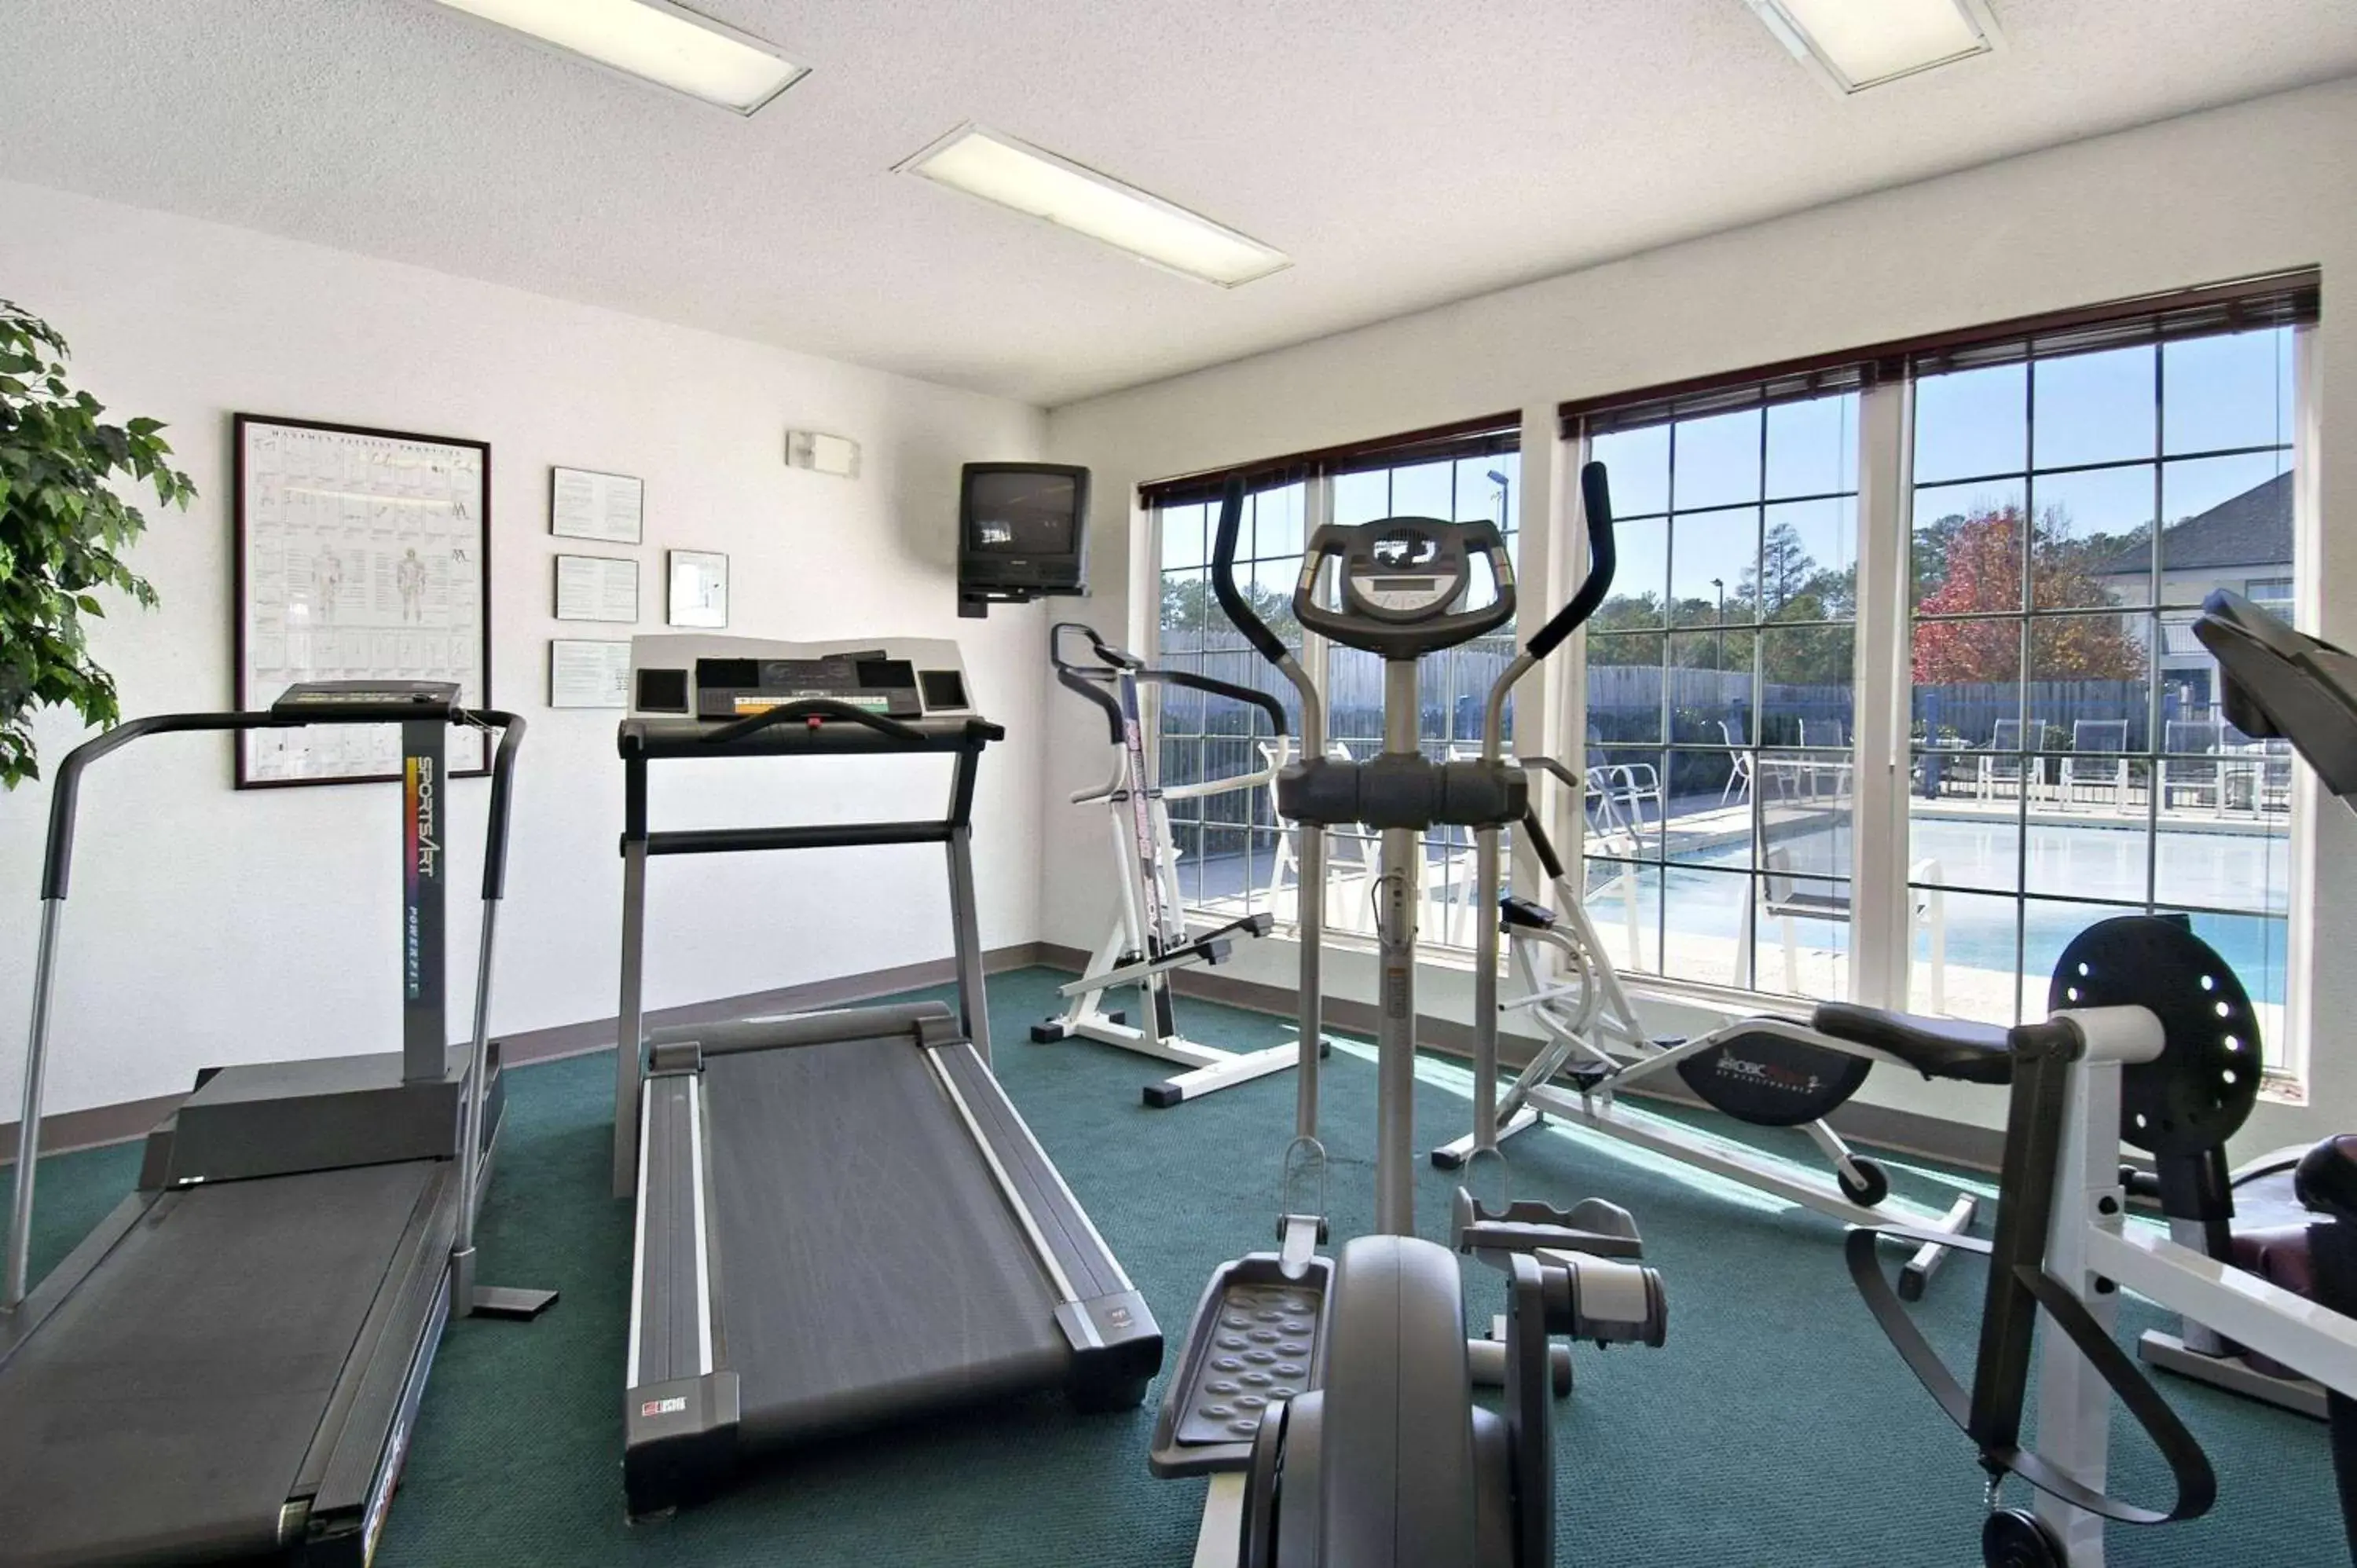 Fitness centre/facilities, Fitness Center/Facilities in Baymont by Wyndham Macon I-475